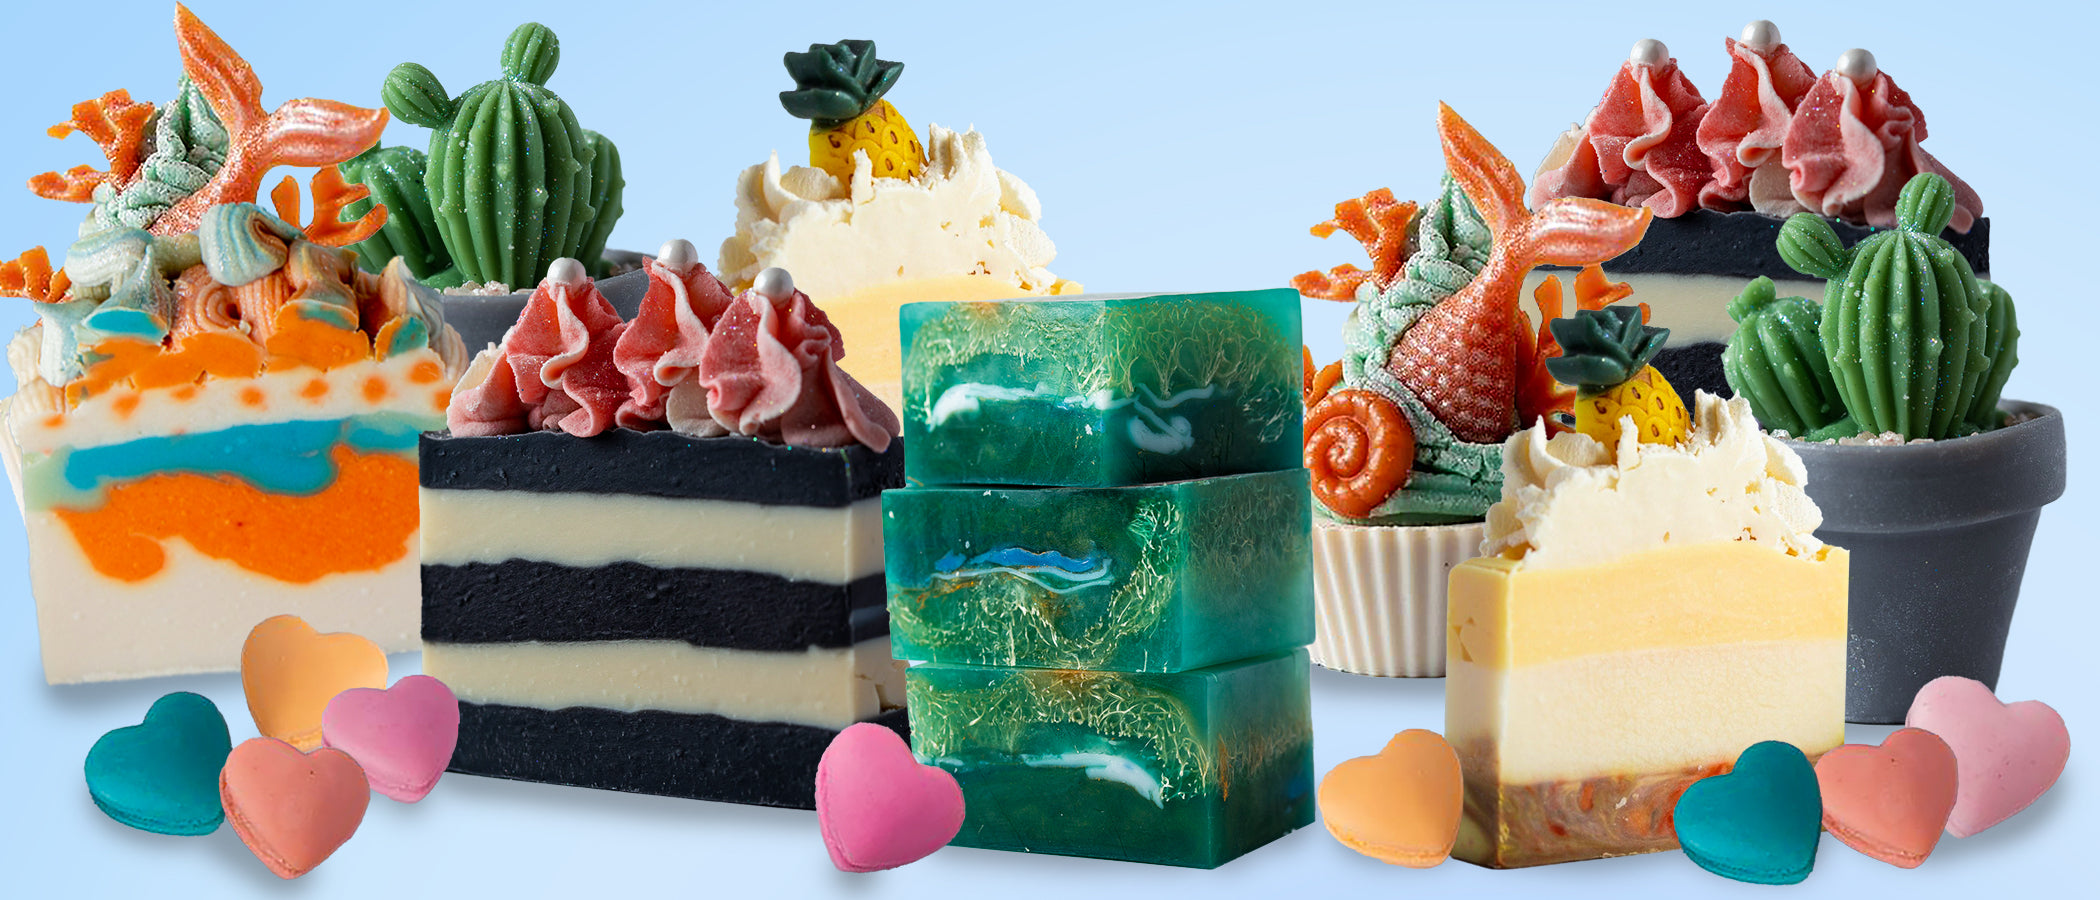 THE PERFECT GIFT FOR FALL: THE FANTASY SOAP COLLECTION